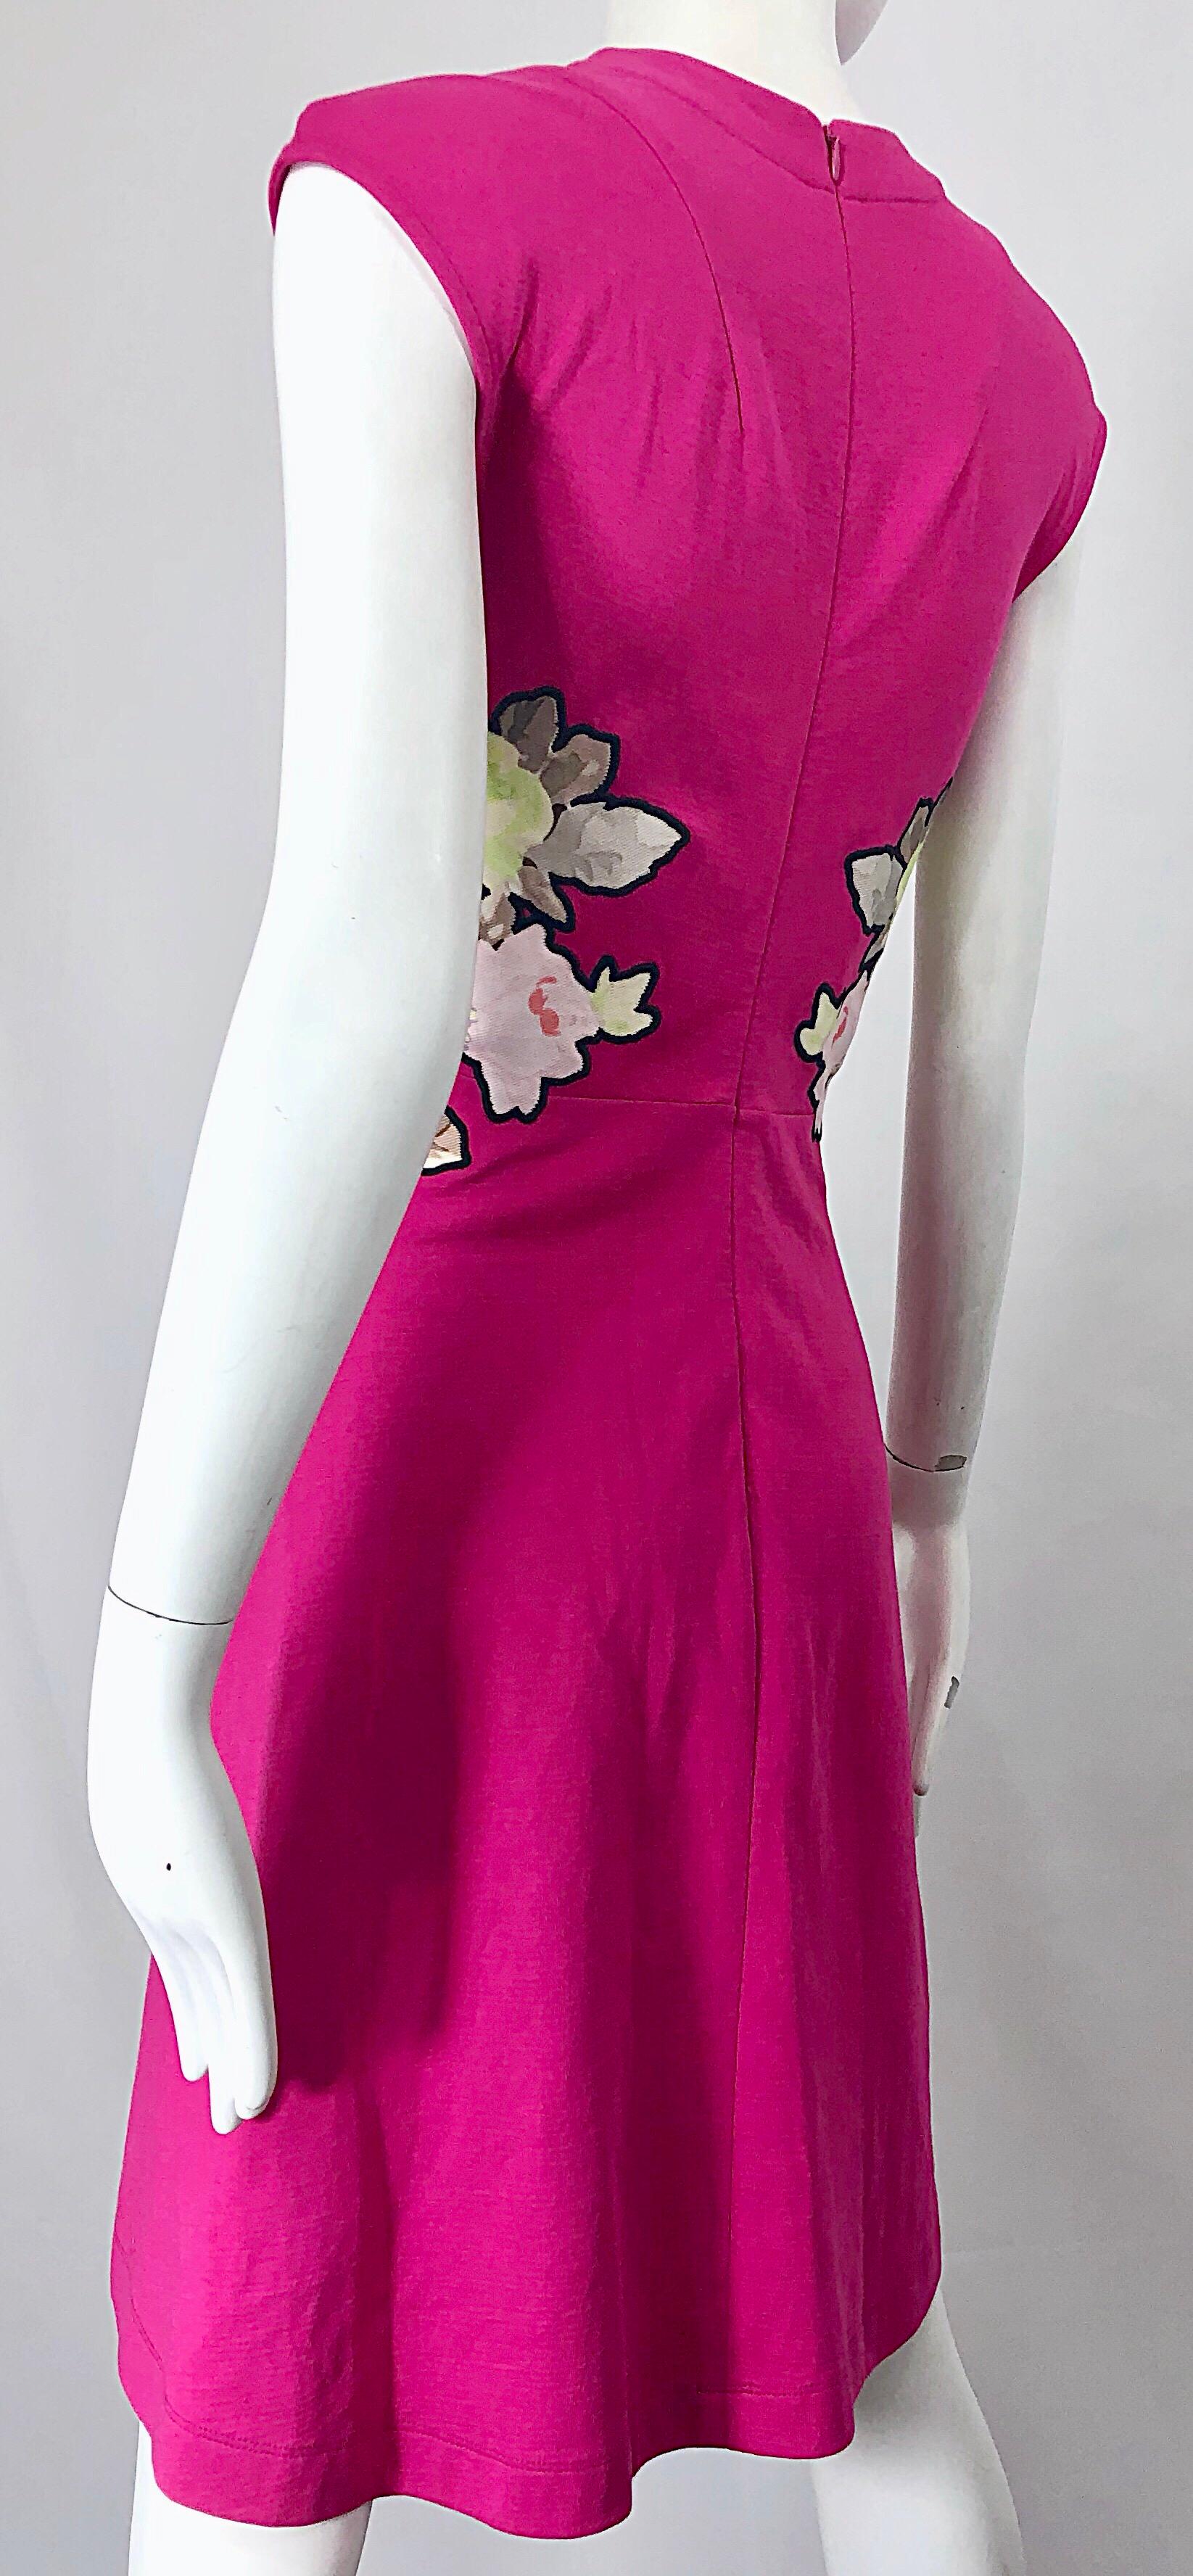 Carven Hot Pink Bouquet of Roses Sleeveless Cotton A - Line Dress Size Medium For Sale 6